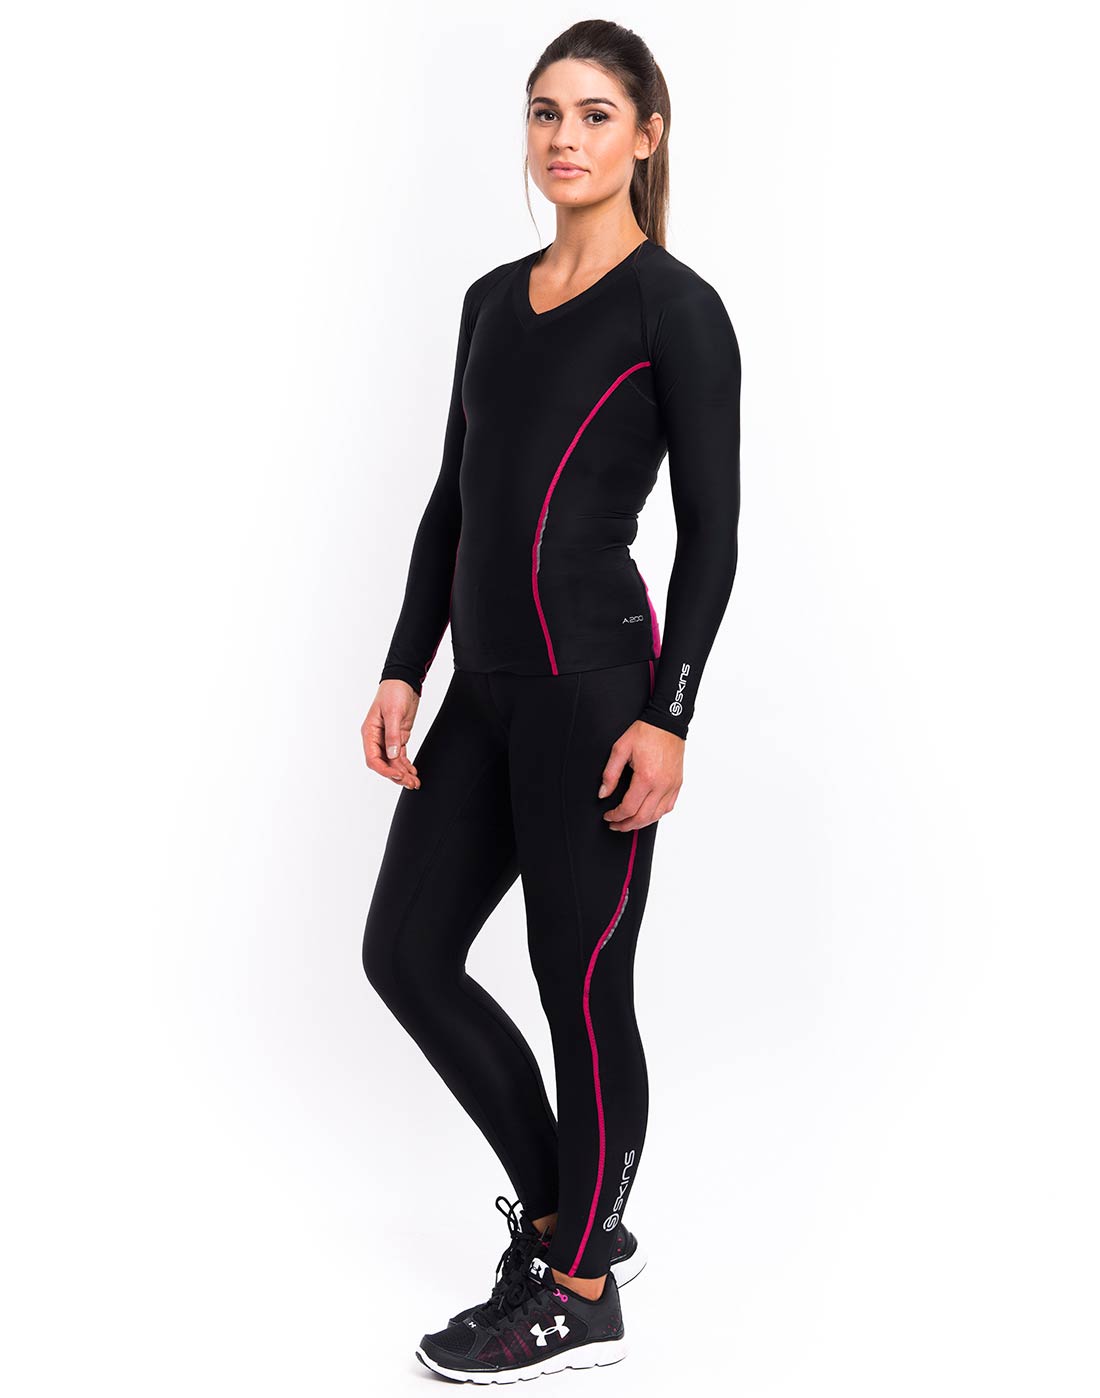 Skins Womens A200 Compression Top - Black | Life Style Sports IE